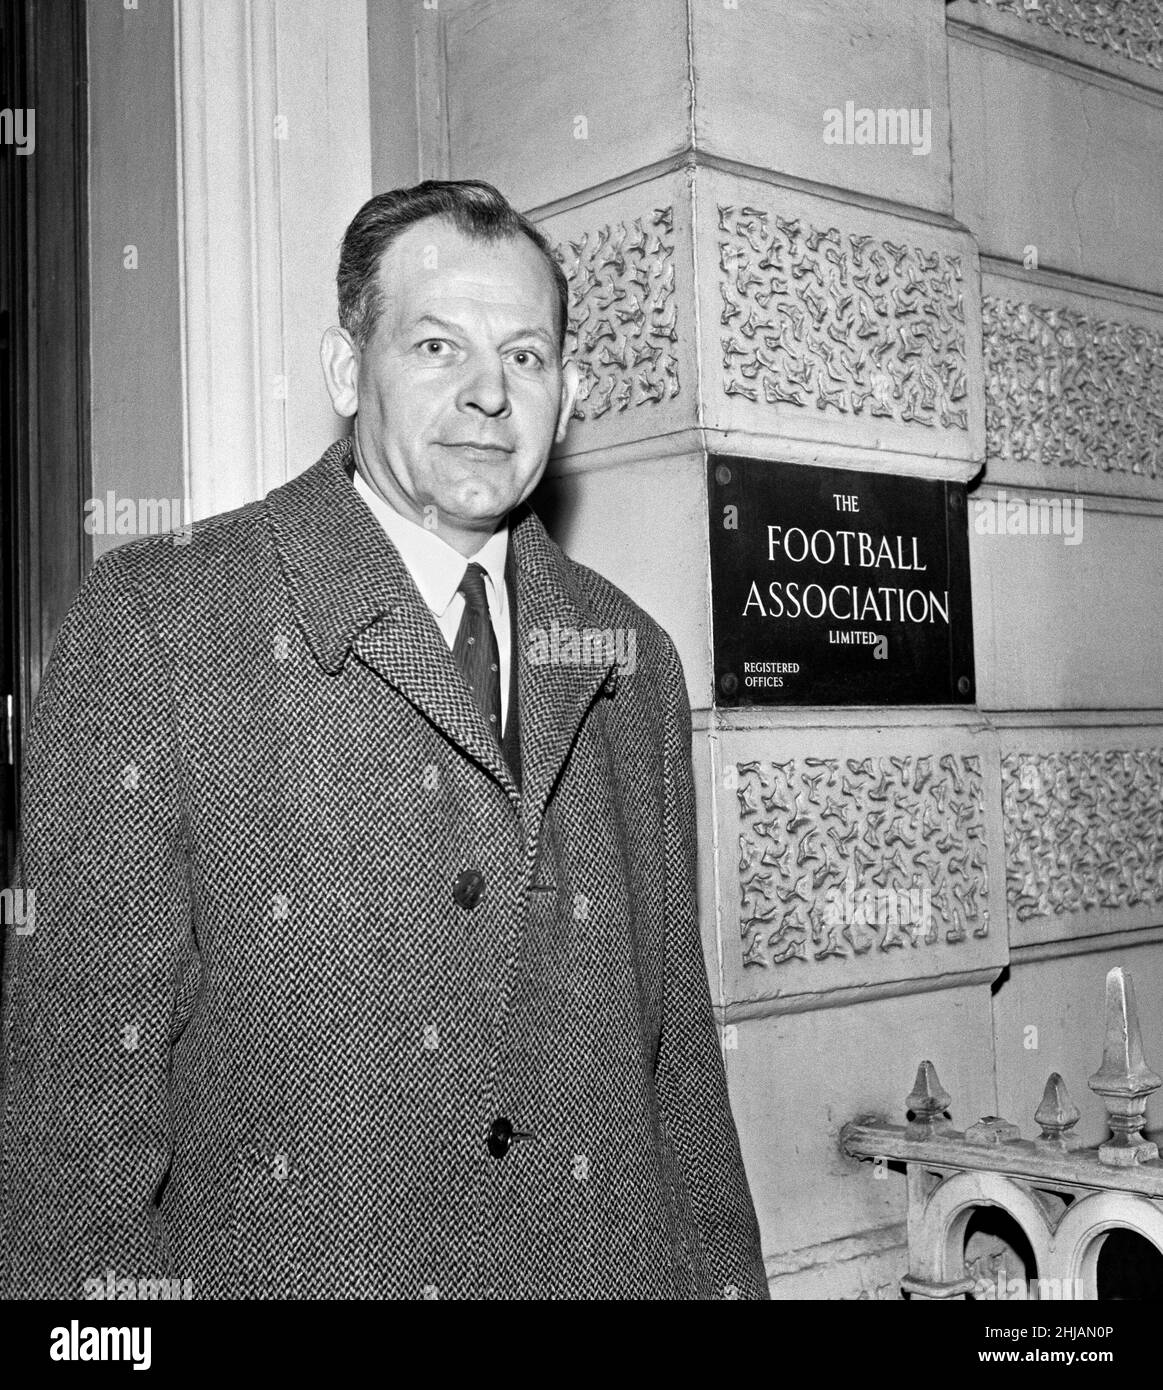 Former England football manager Walter Winterbottom leaving FA Headquarters. Walter Winterbottom managed England Football Team from 1946 to 1962 and The Great Britain Football Team in 1952  Picture taken 31st December 1962. Stock Photo